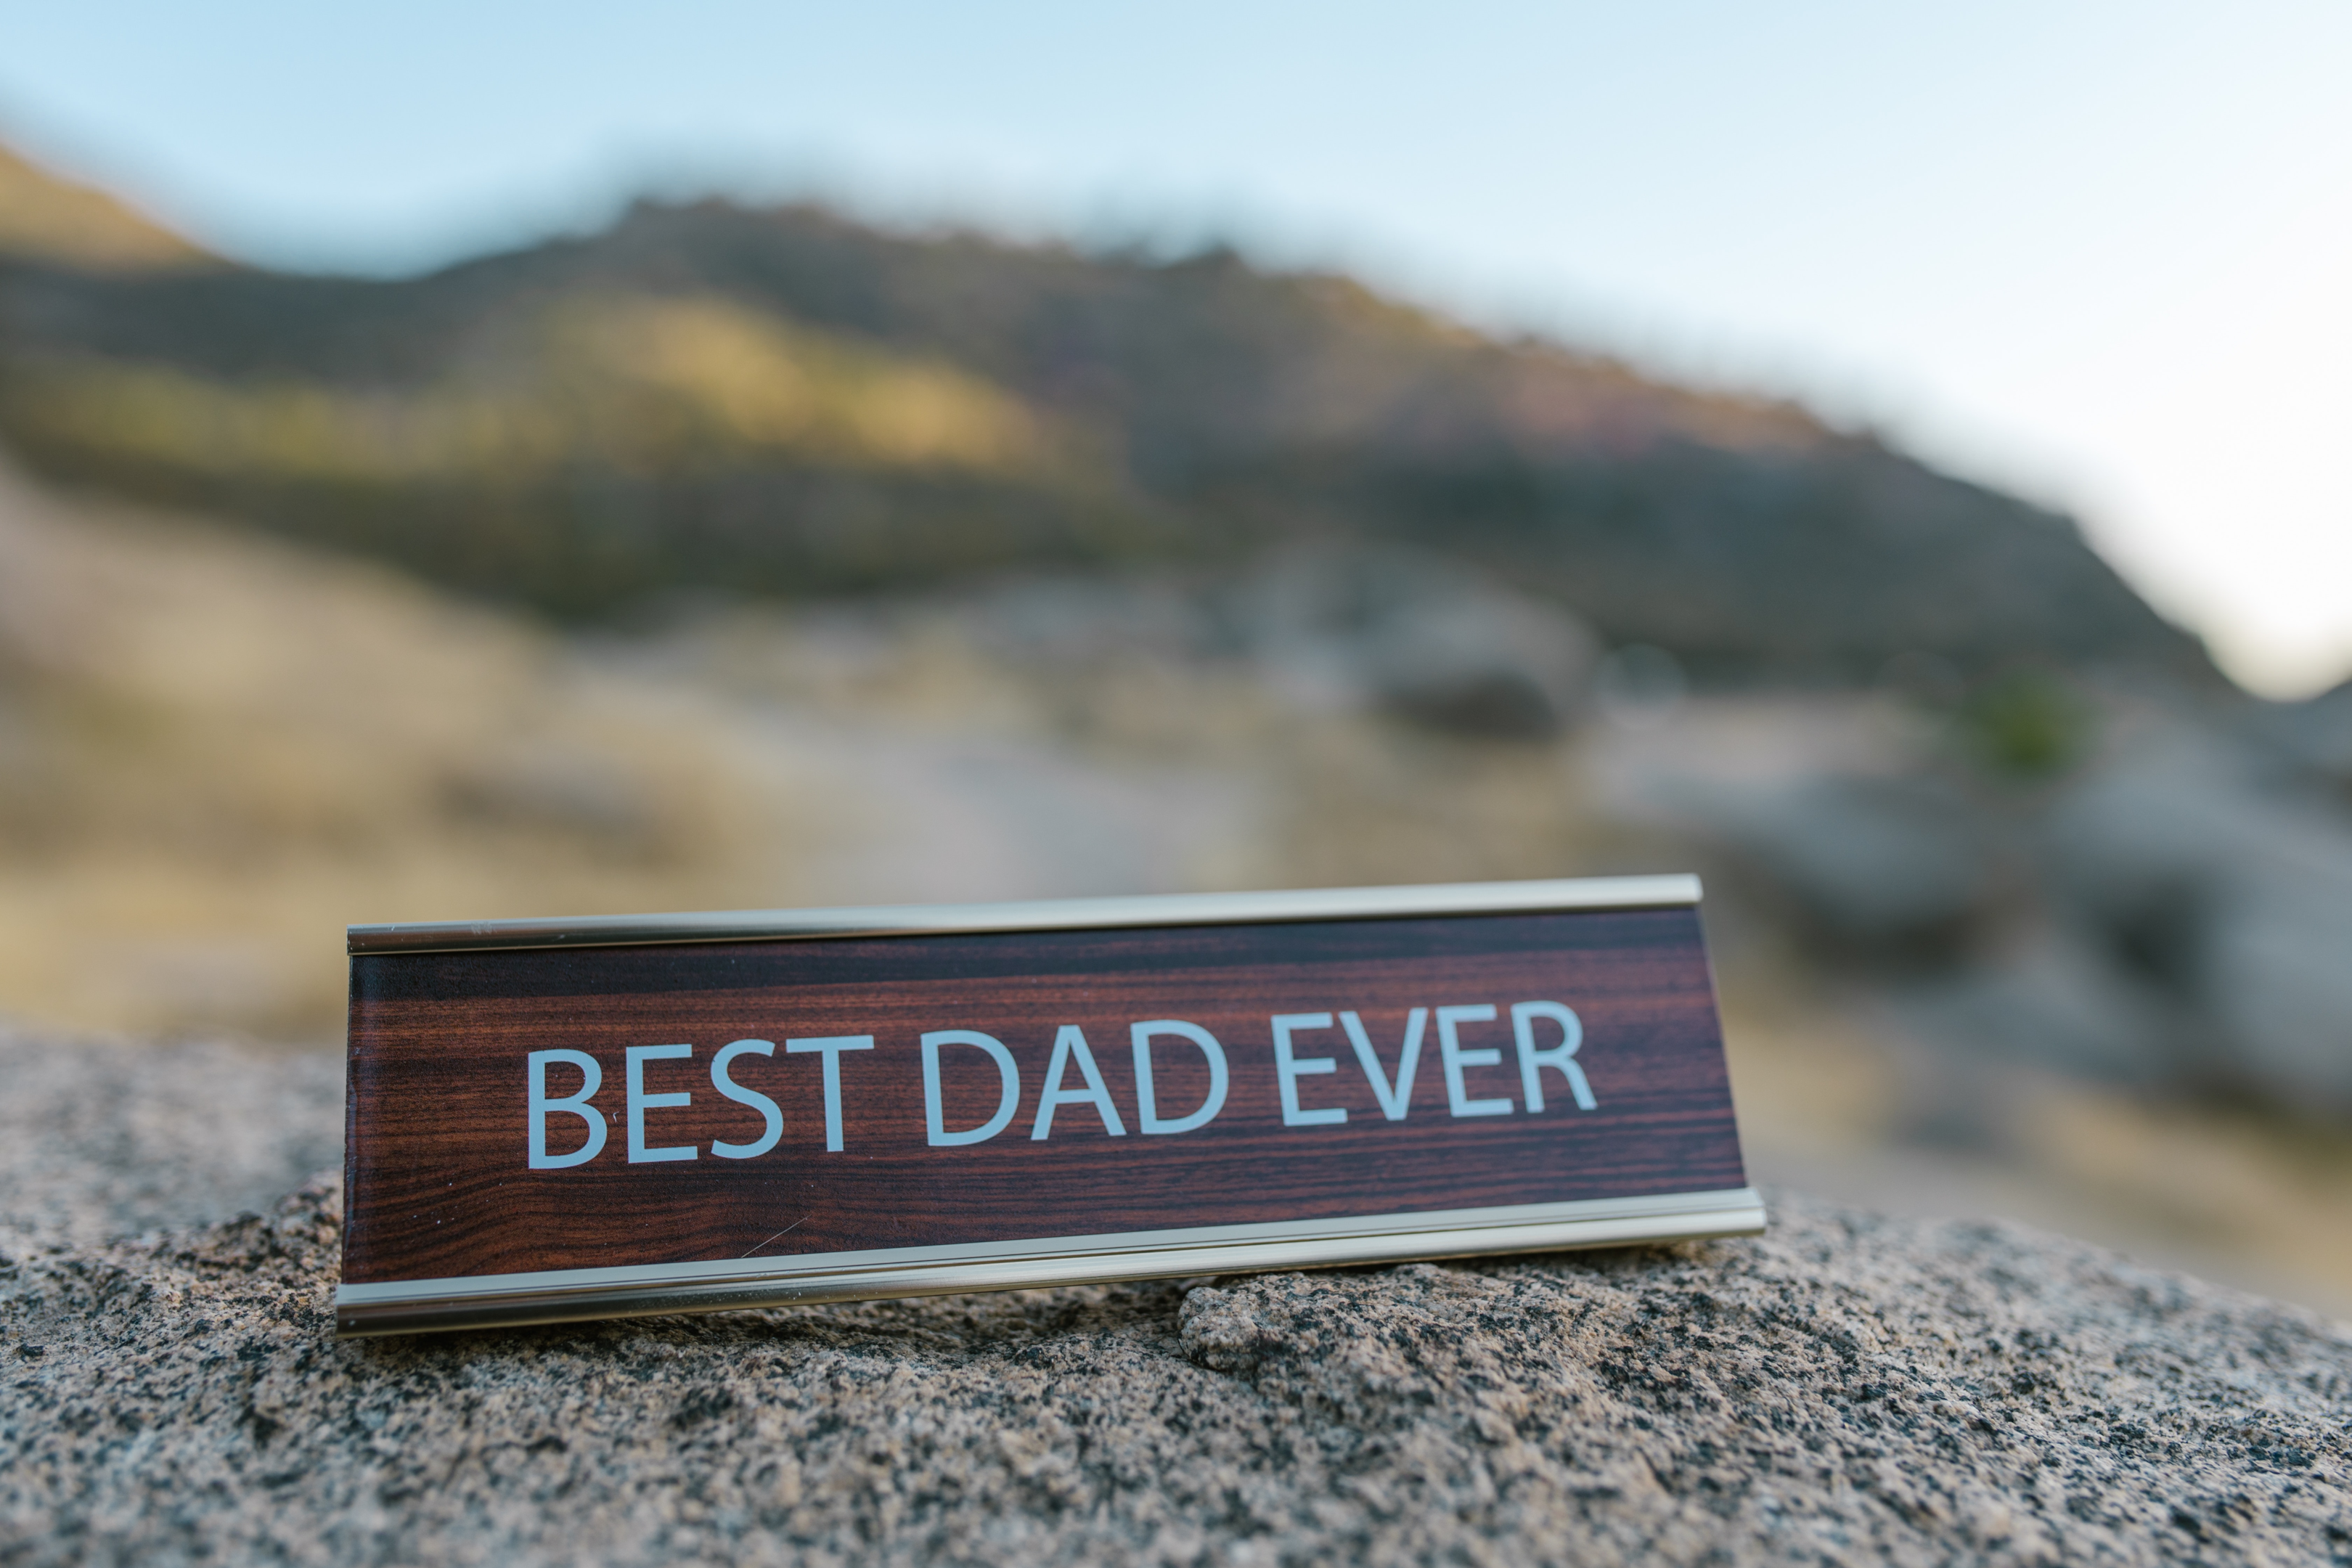 history of father's day, father's day trivia, ofw property investment, ofw investment